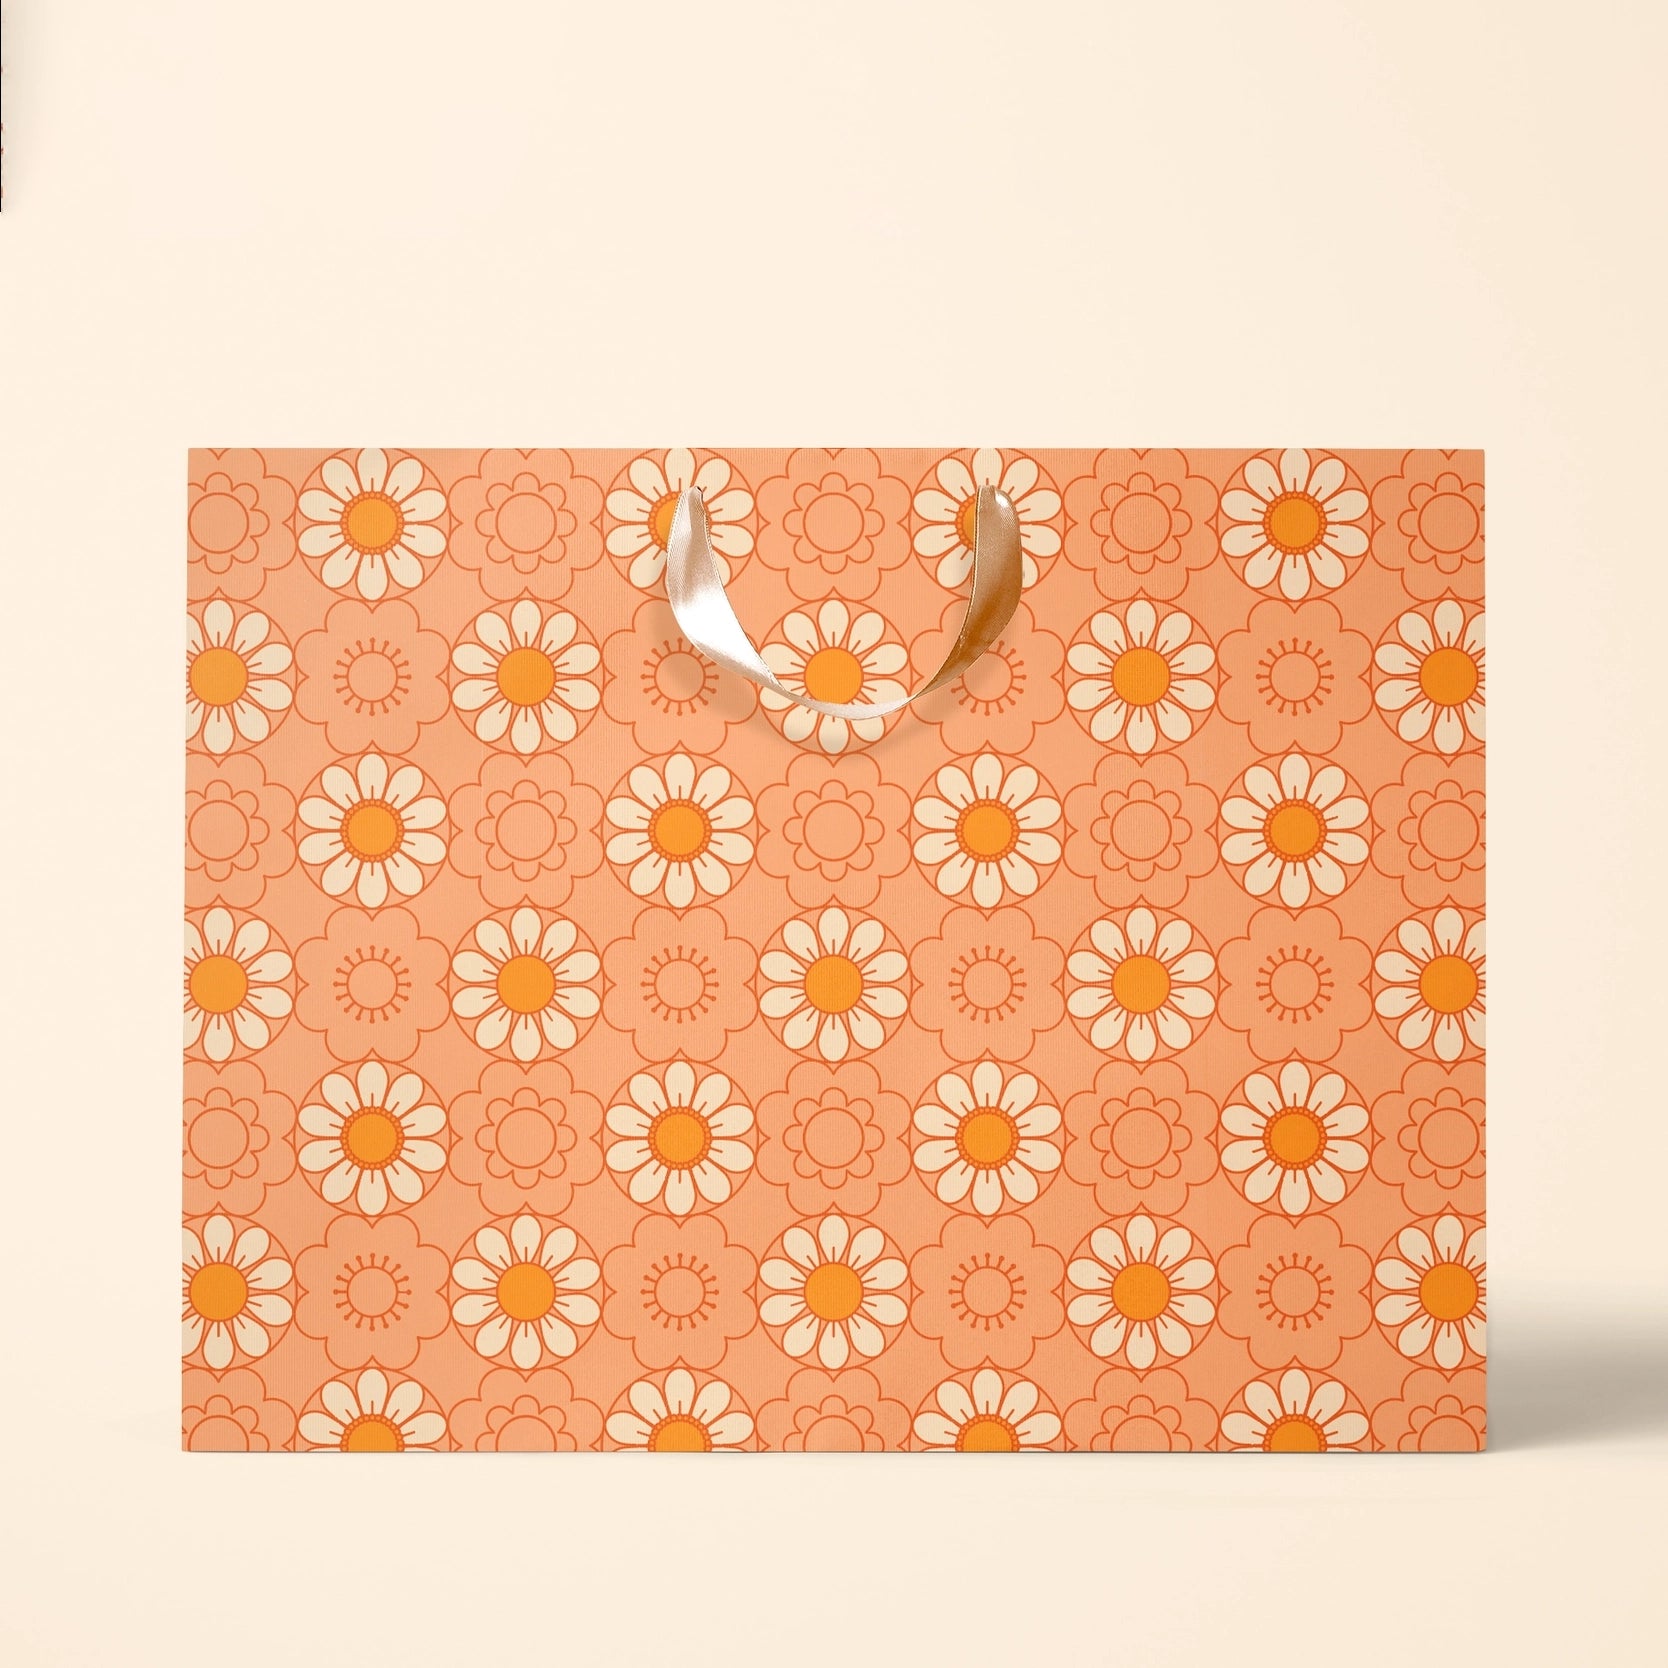 On an ivory background is the large gift bag with an orange color and an ivory and orange daisy pattern.